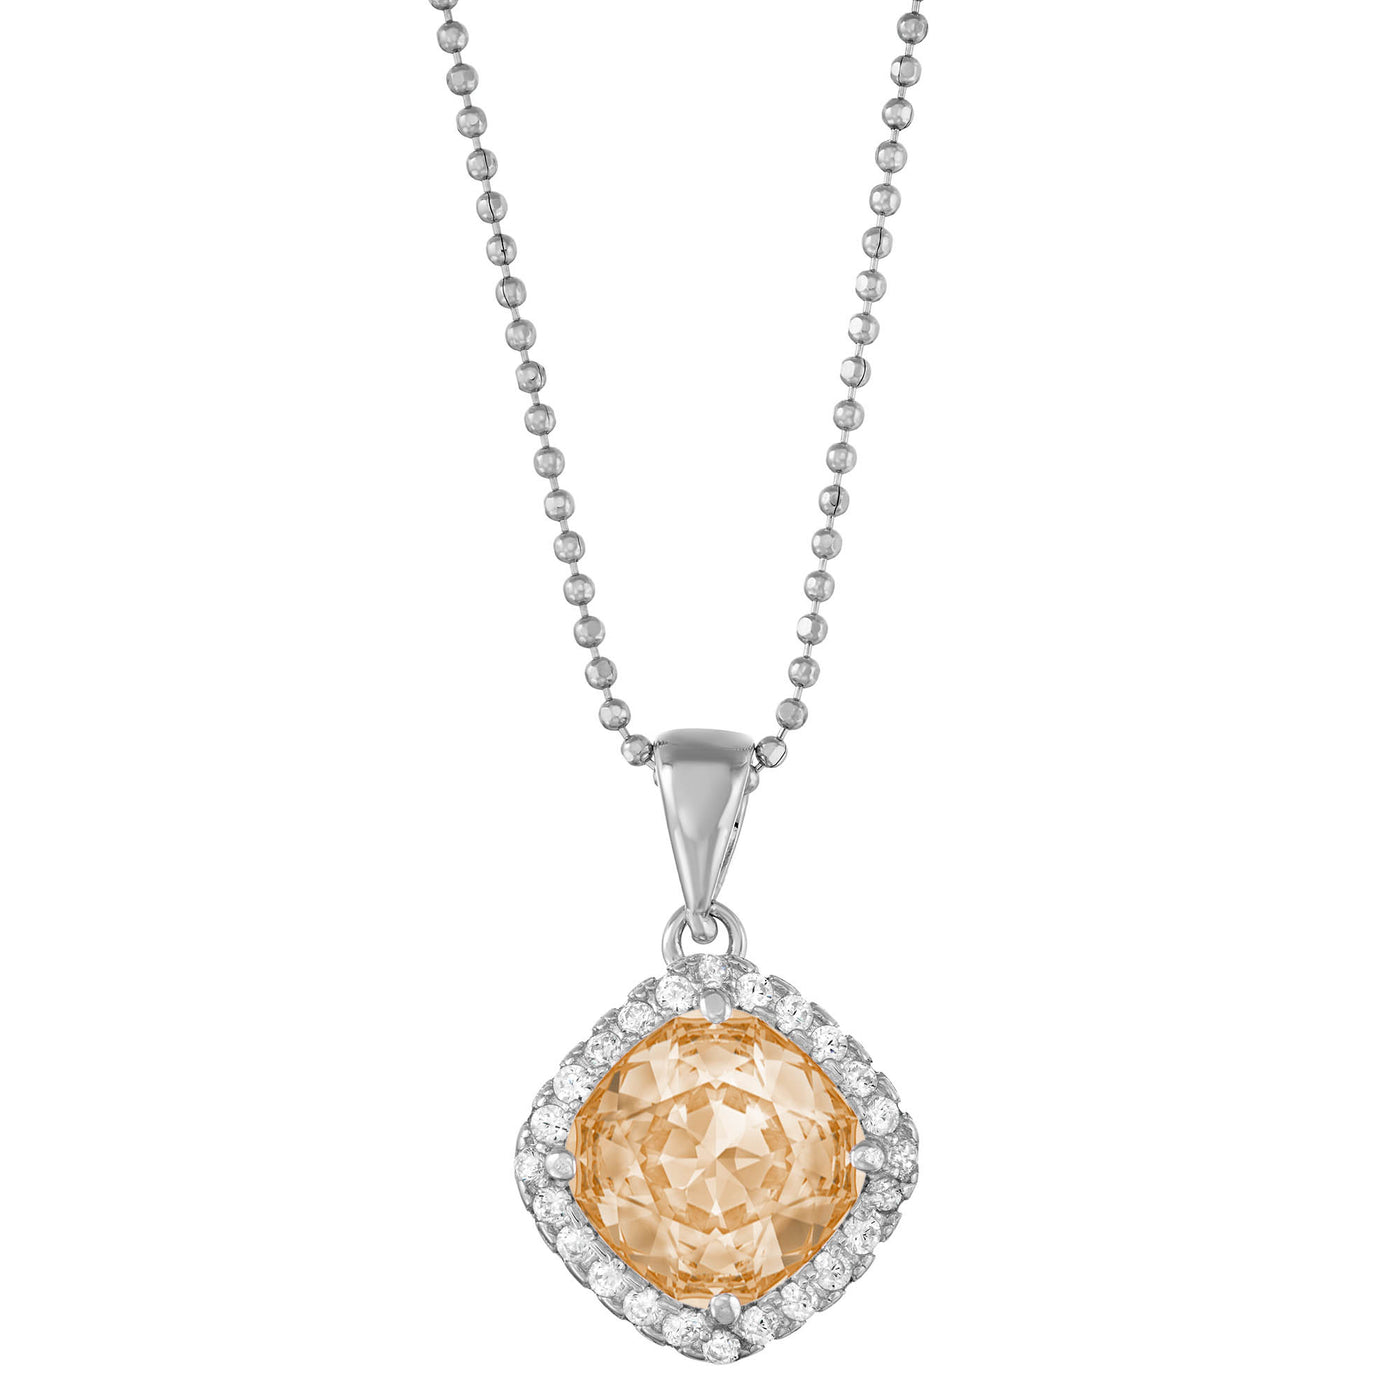 Rebecca Sloane Silver Cushion with Faceted Champagne CZ Pendant